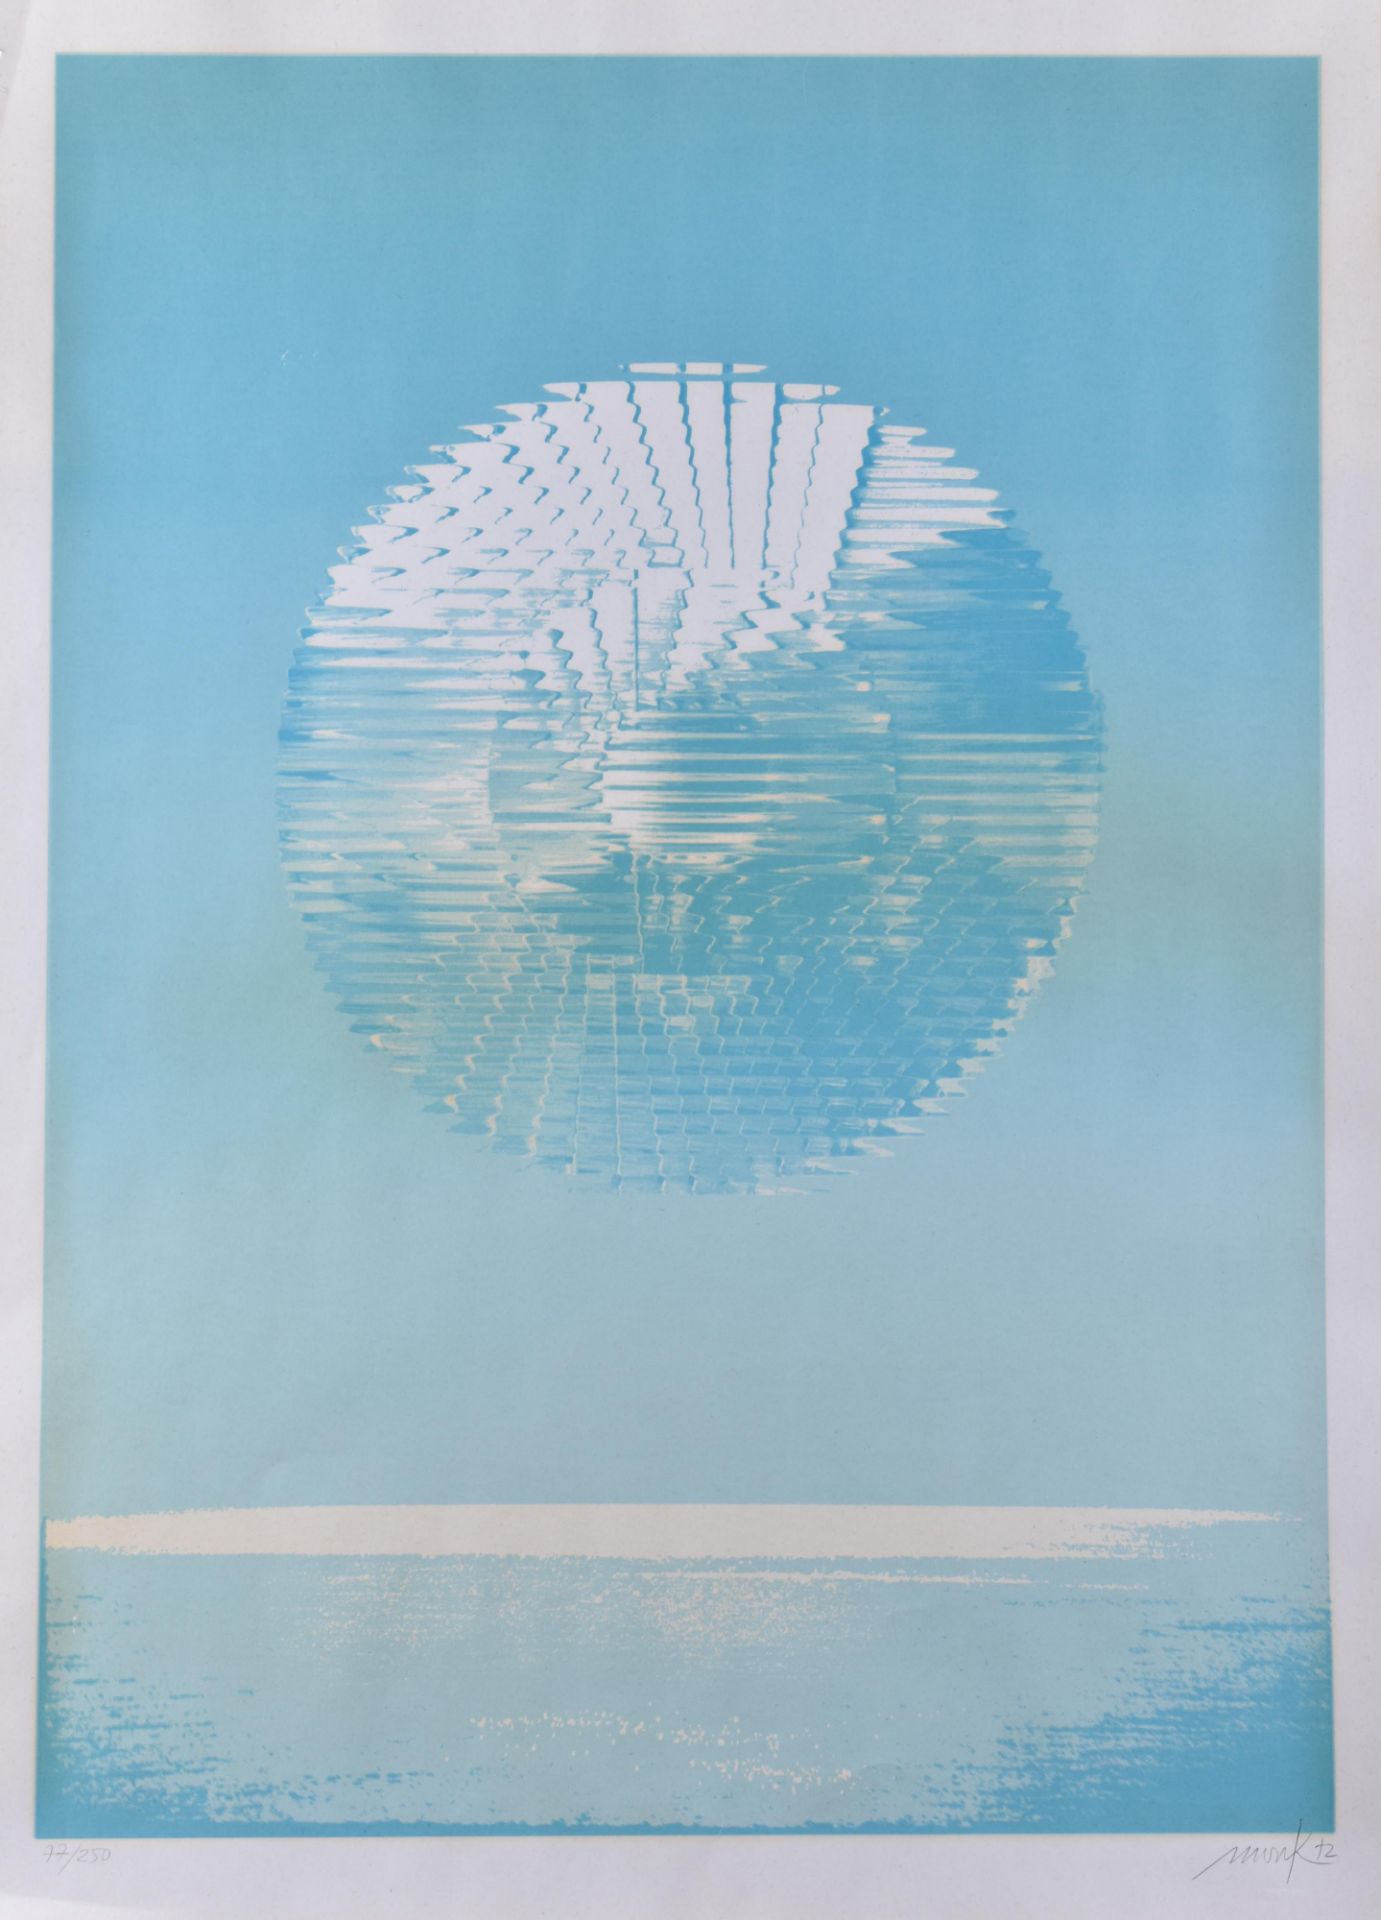 Heinz MACK (1931)"Rotor"graphic - color screenprint, 77.5 cm x 56 cm, handsigned and dated 72 on the